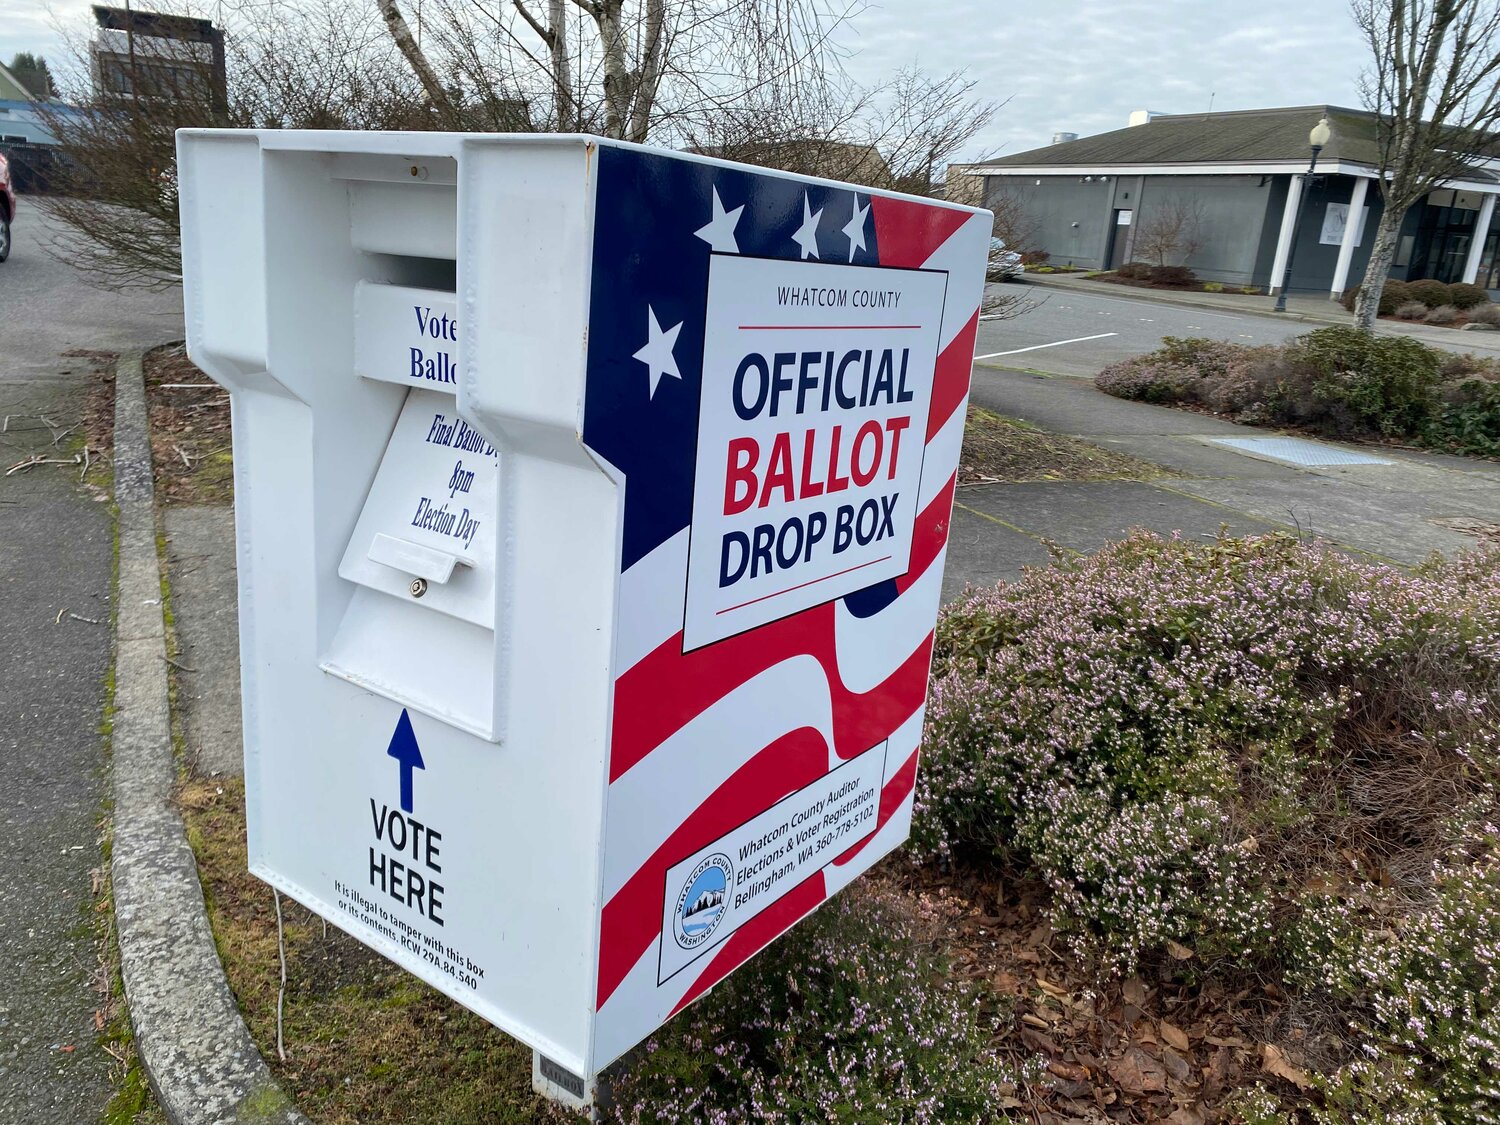 The Whatcom County ballot drop box at Blaine Public Library, 610 3rd Street, on February 7.